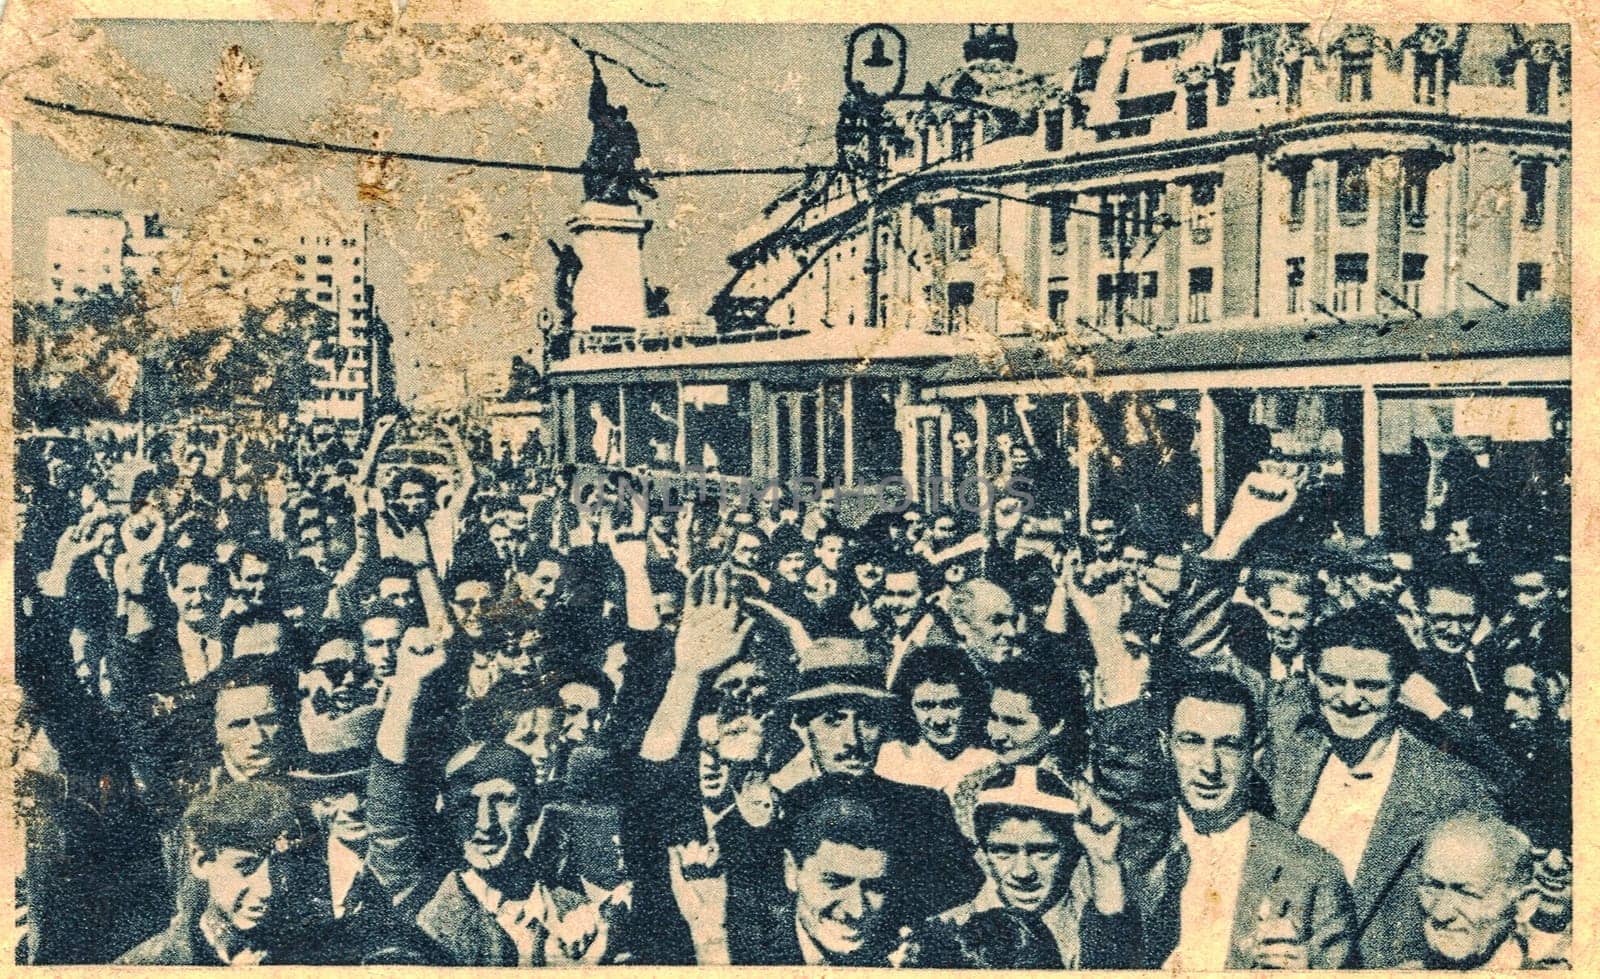 BUCHAREST, ROMANIA - AUGUST 25, 1944: Romanians greet Red Army. The Red Army's advance into Romania, but did not avert a rapid Soviet occupation and capture of about 130,000 Romanian soldiers, who were transported to the Soviet Union, where many perished in prison camps.